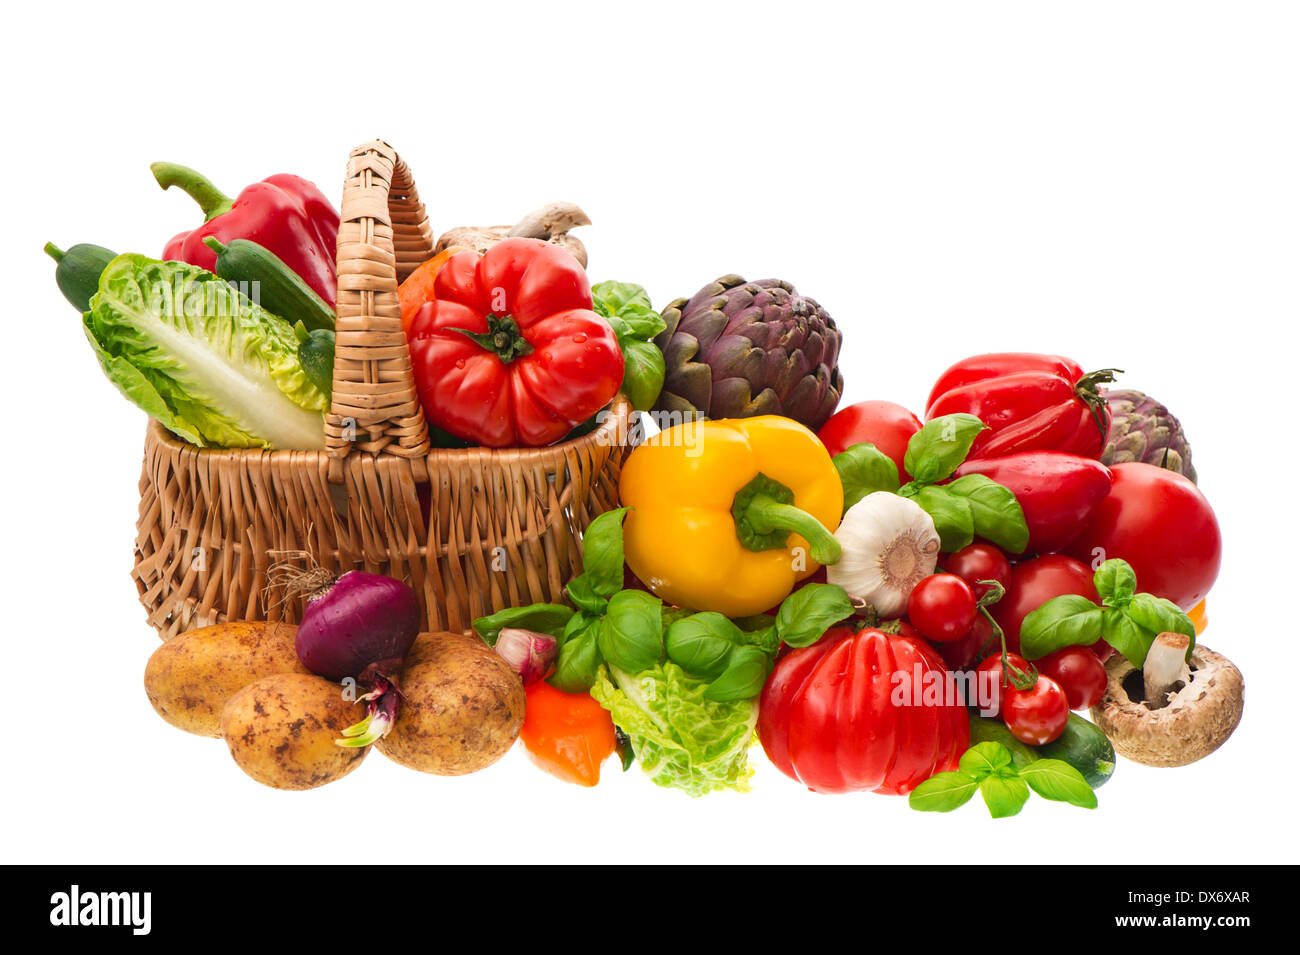 fresh vegetables and herbs on wooden background. organic diary products. shopping basket. food. healthy nutrition Stock Photo